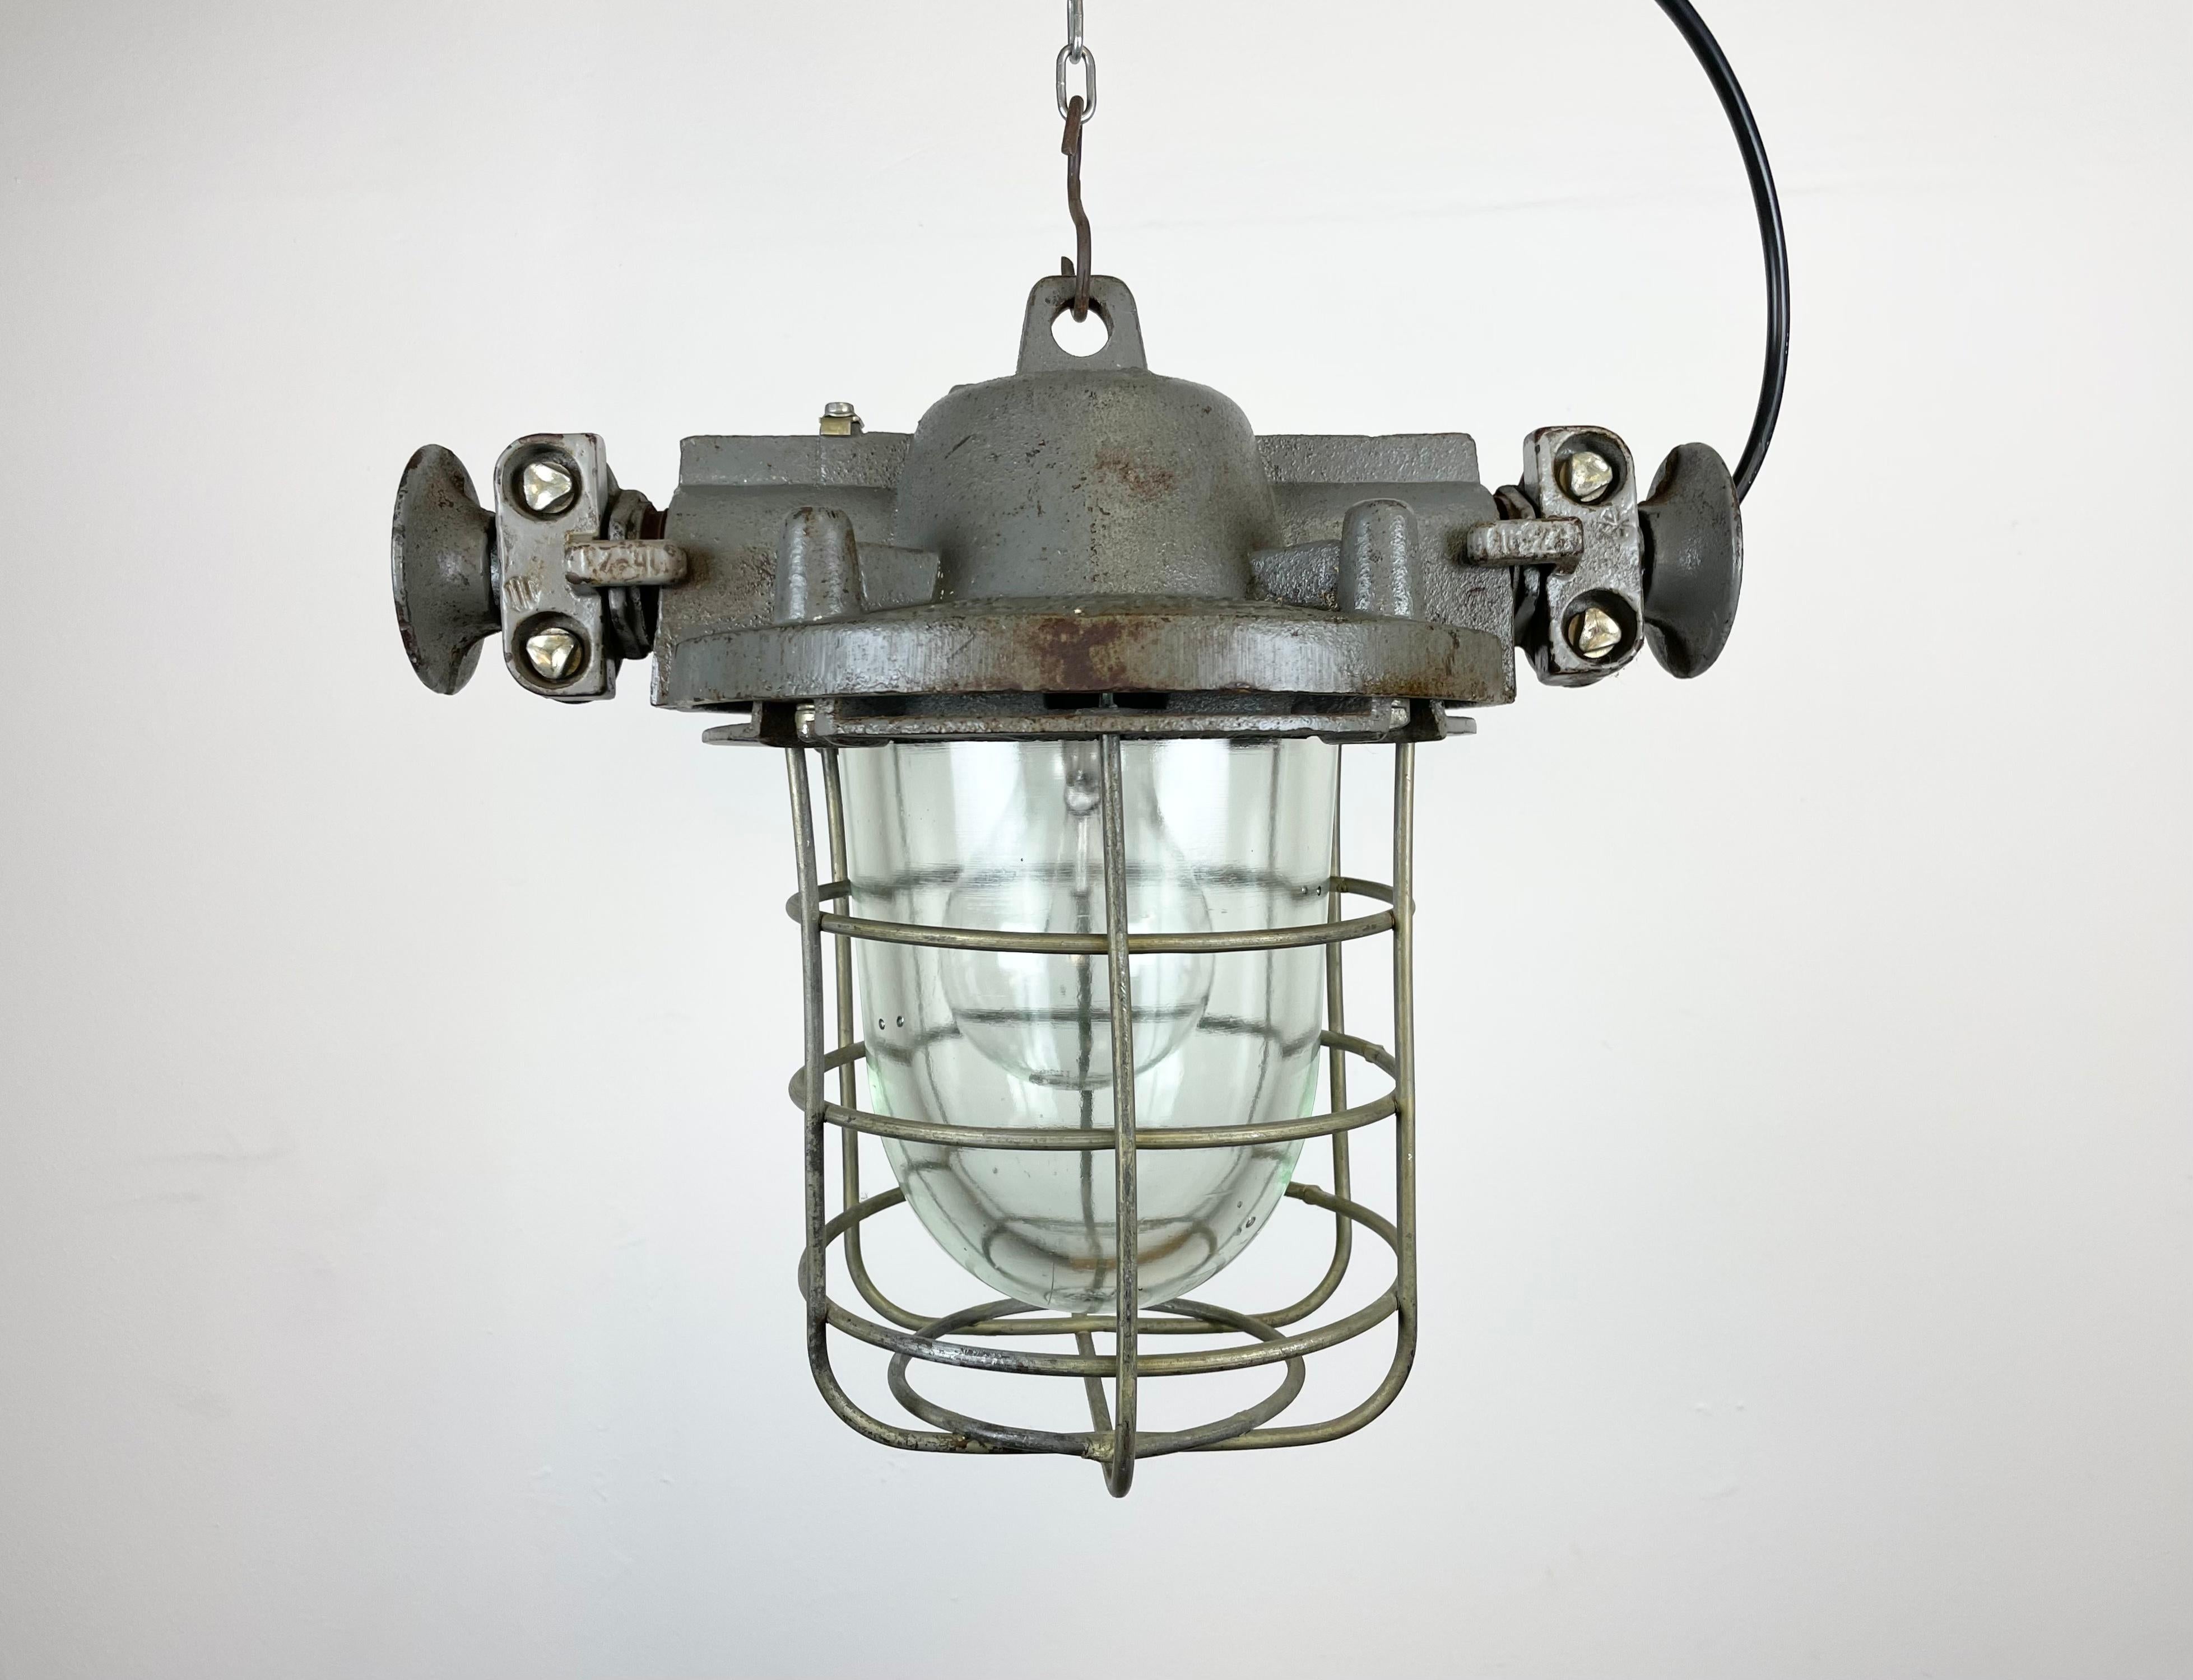 Industrial exposion-proof hanging lamp made in Poland during the 1960s. These lamps were used in factories where was a danger of gas or dust explosion. It features a cast iron body, a clear glass cover an an iron grid. The porcelain socket requires